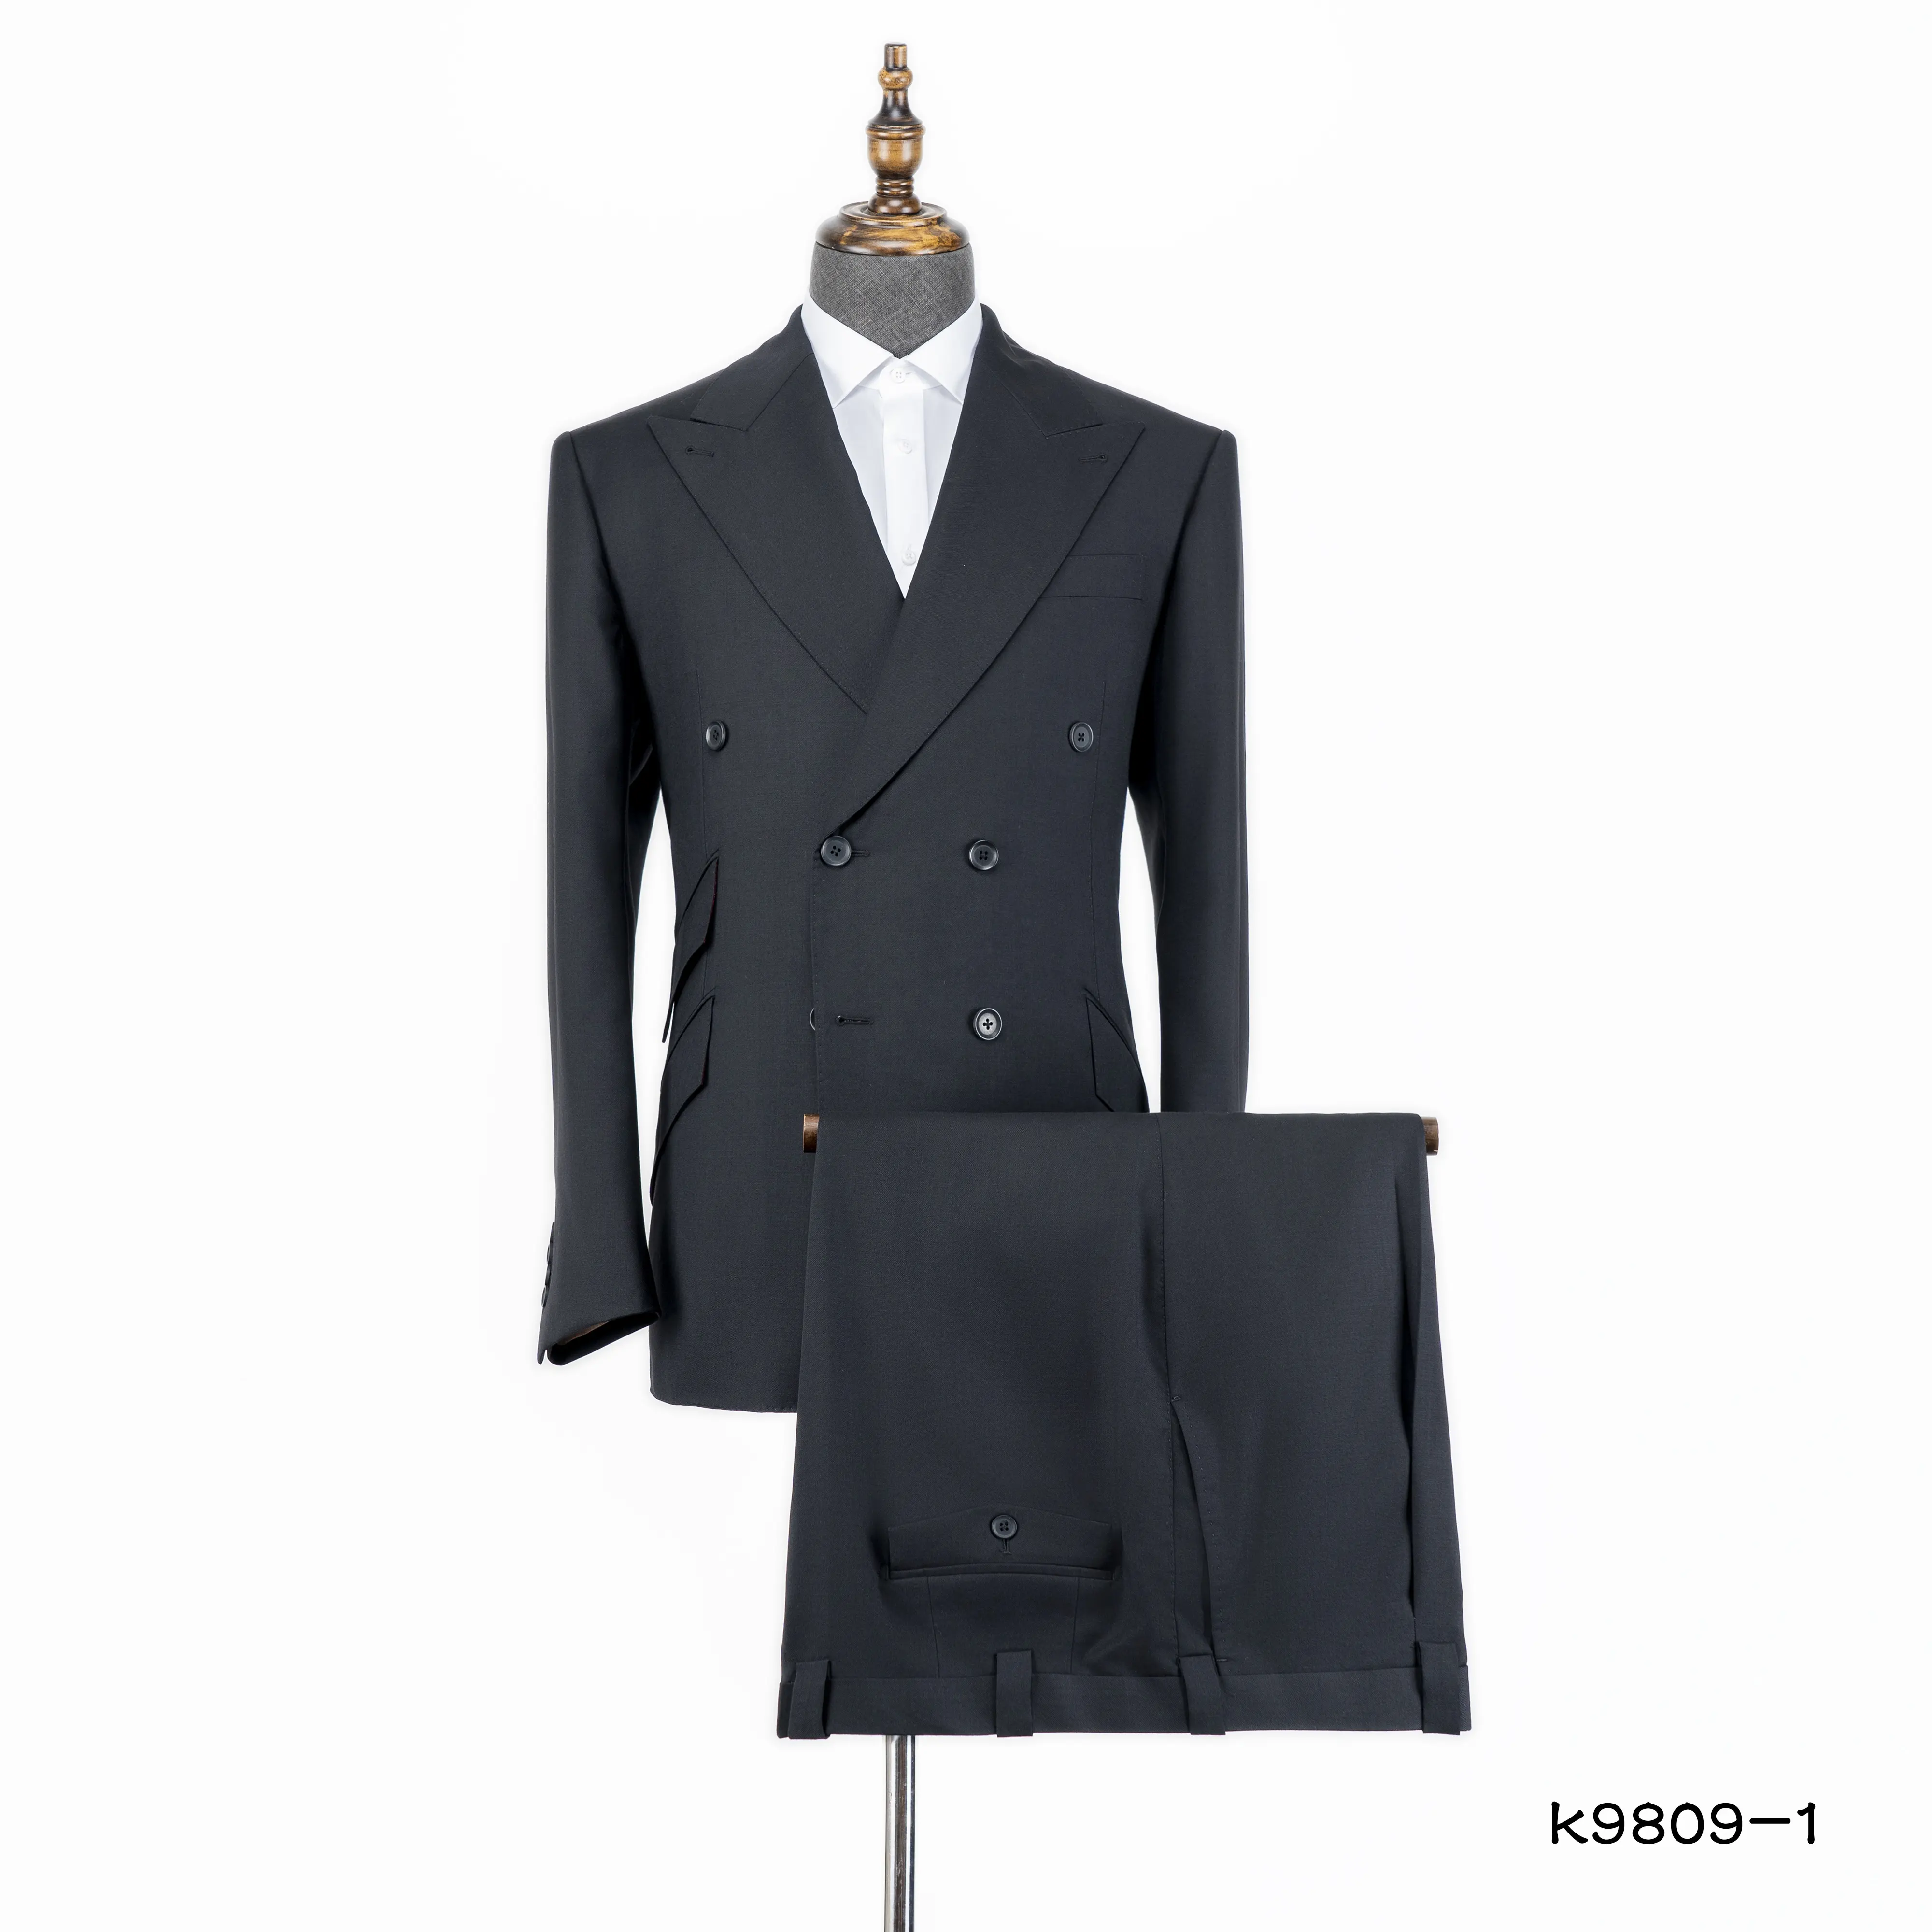 Double Breasted Black Two Pieces Three Pockets Made To Measure Custom Made Wool Mens Business Casual Tailored Peaked Suit